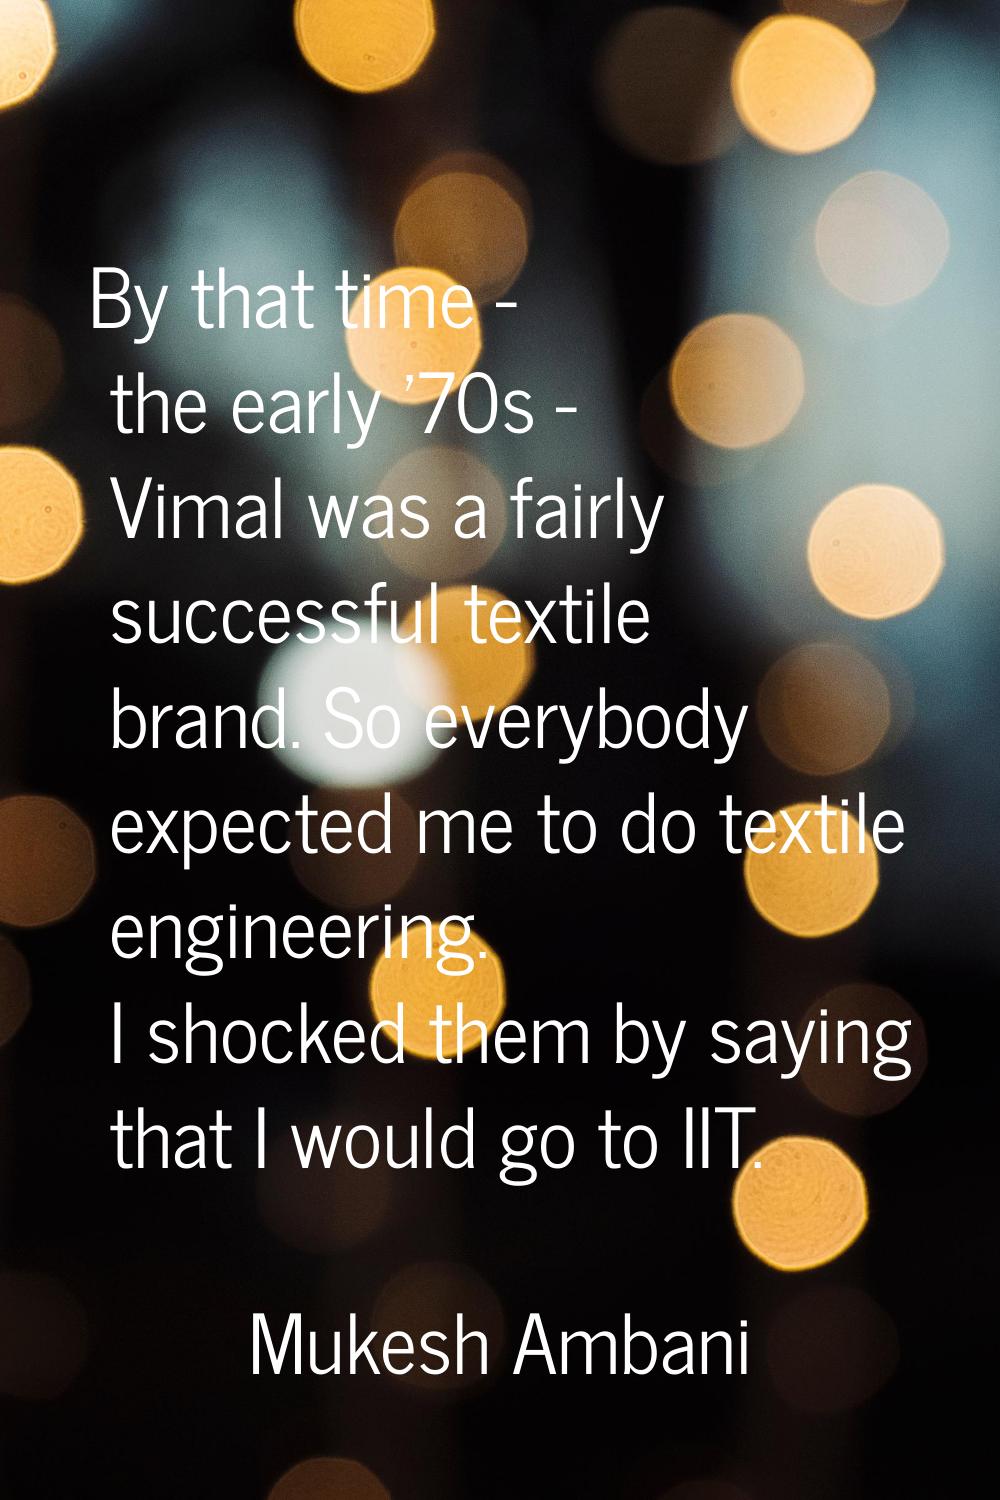 By that time - the early '70s - Vimal was a fairly successful textile brand. So everybody expected 